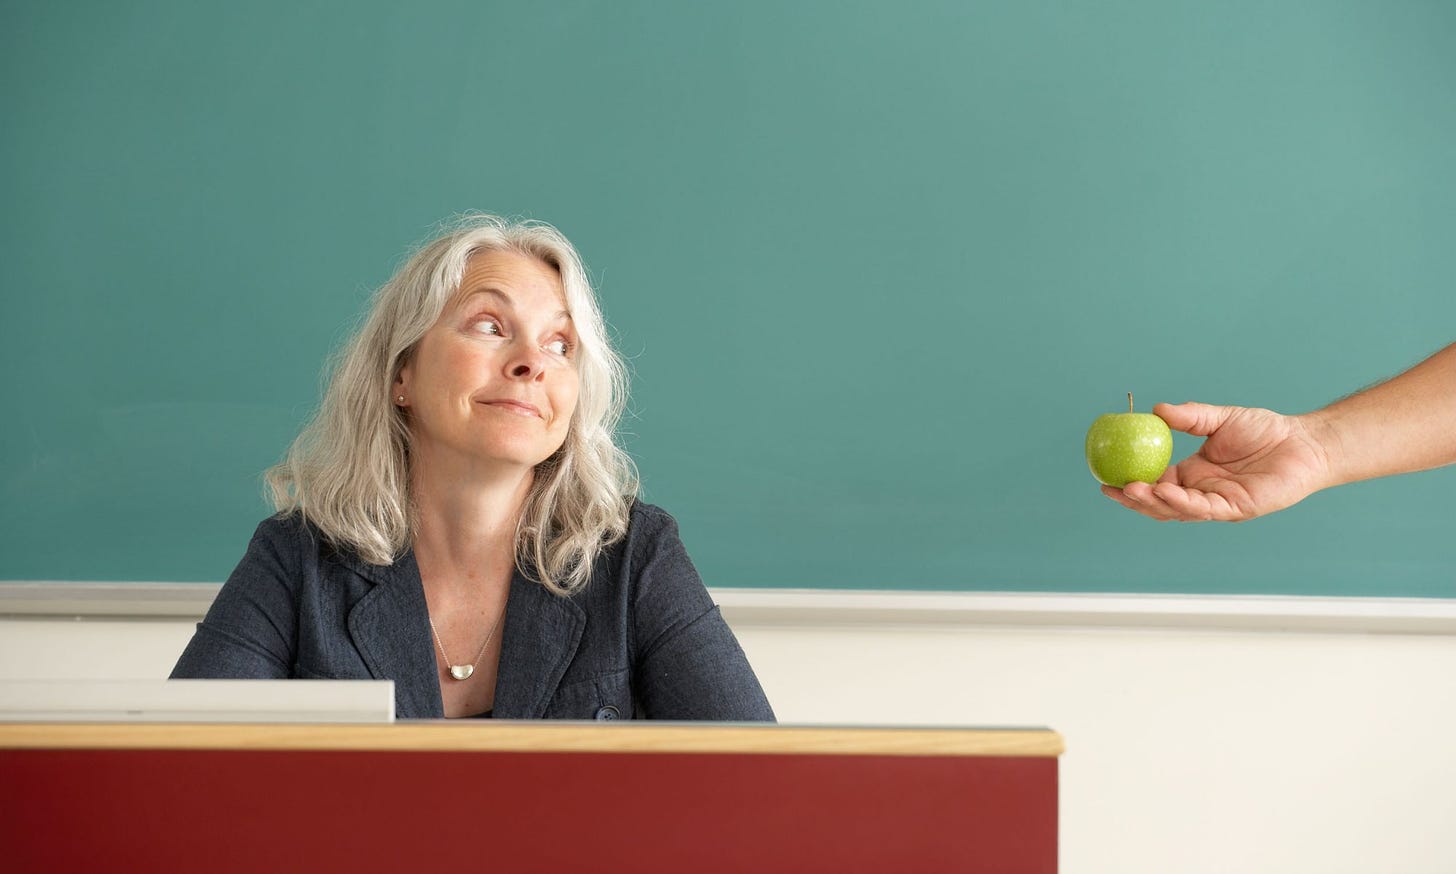 The Reason We Give Apples to Teachers | MyRecipes